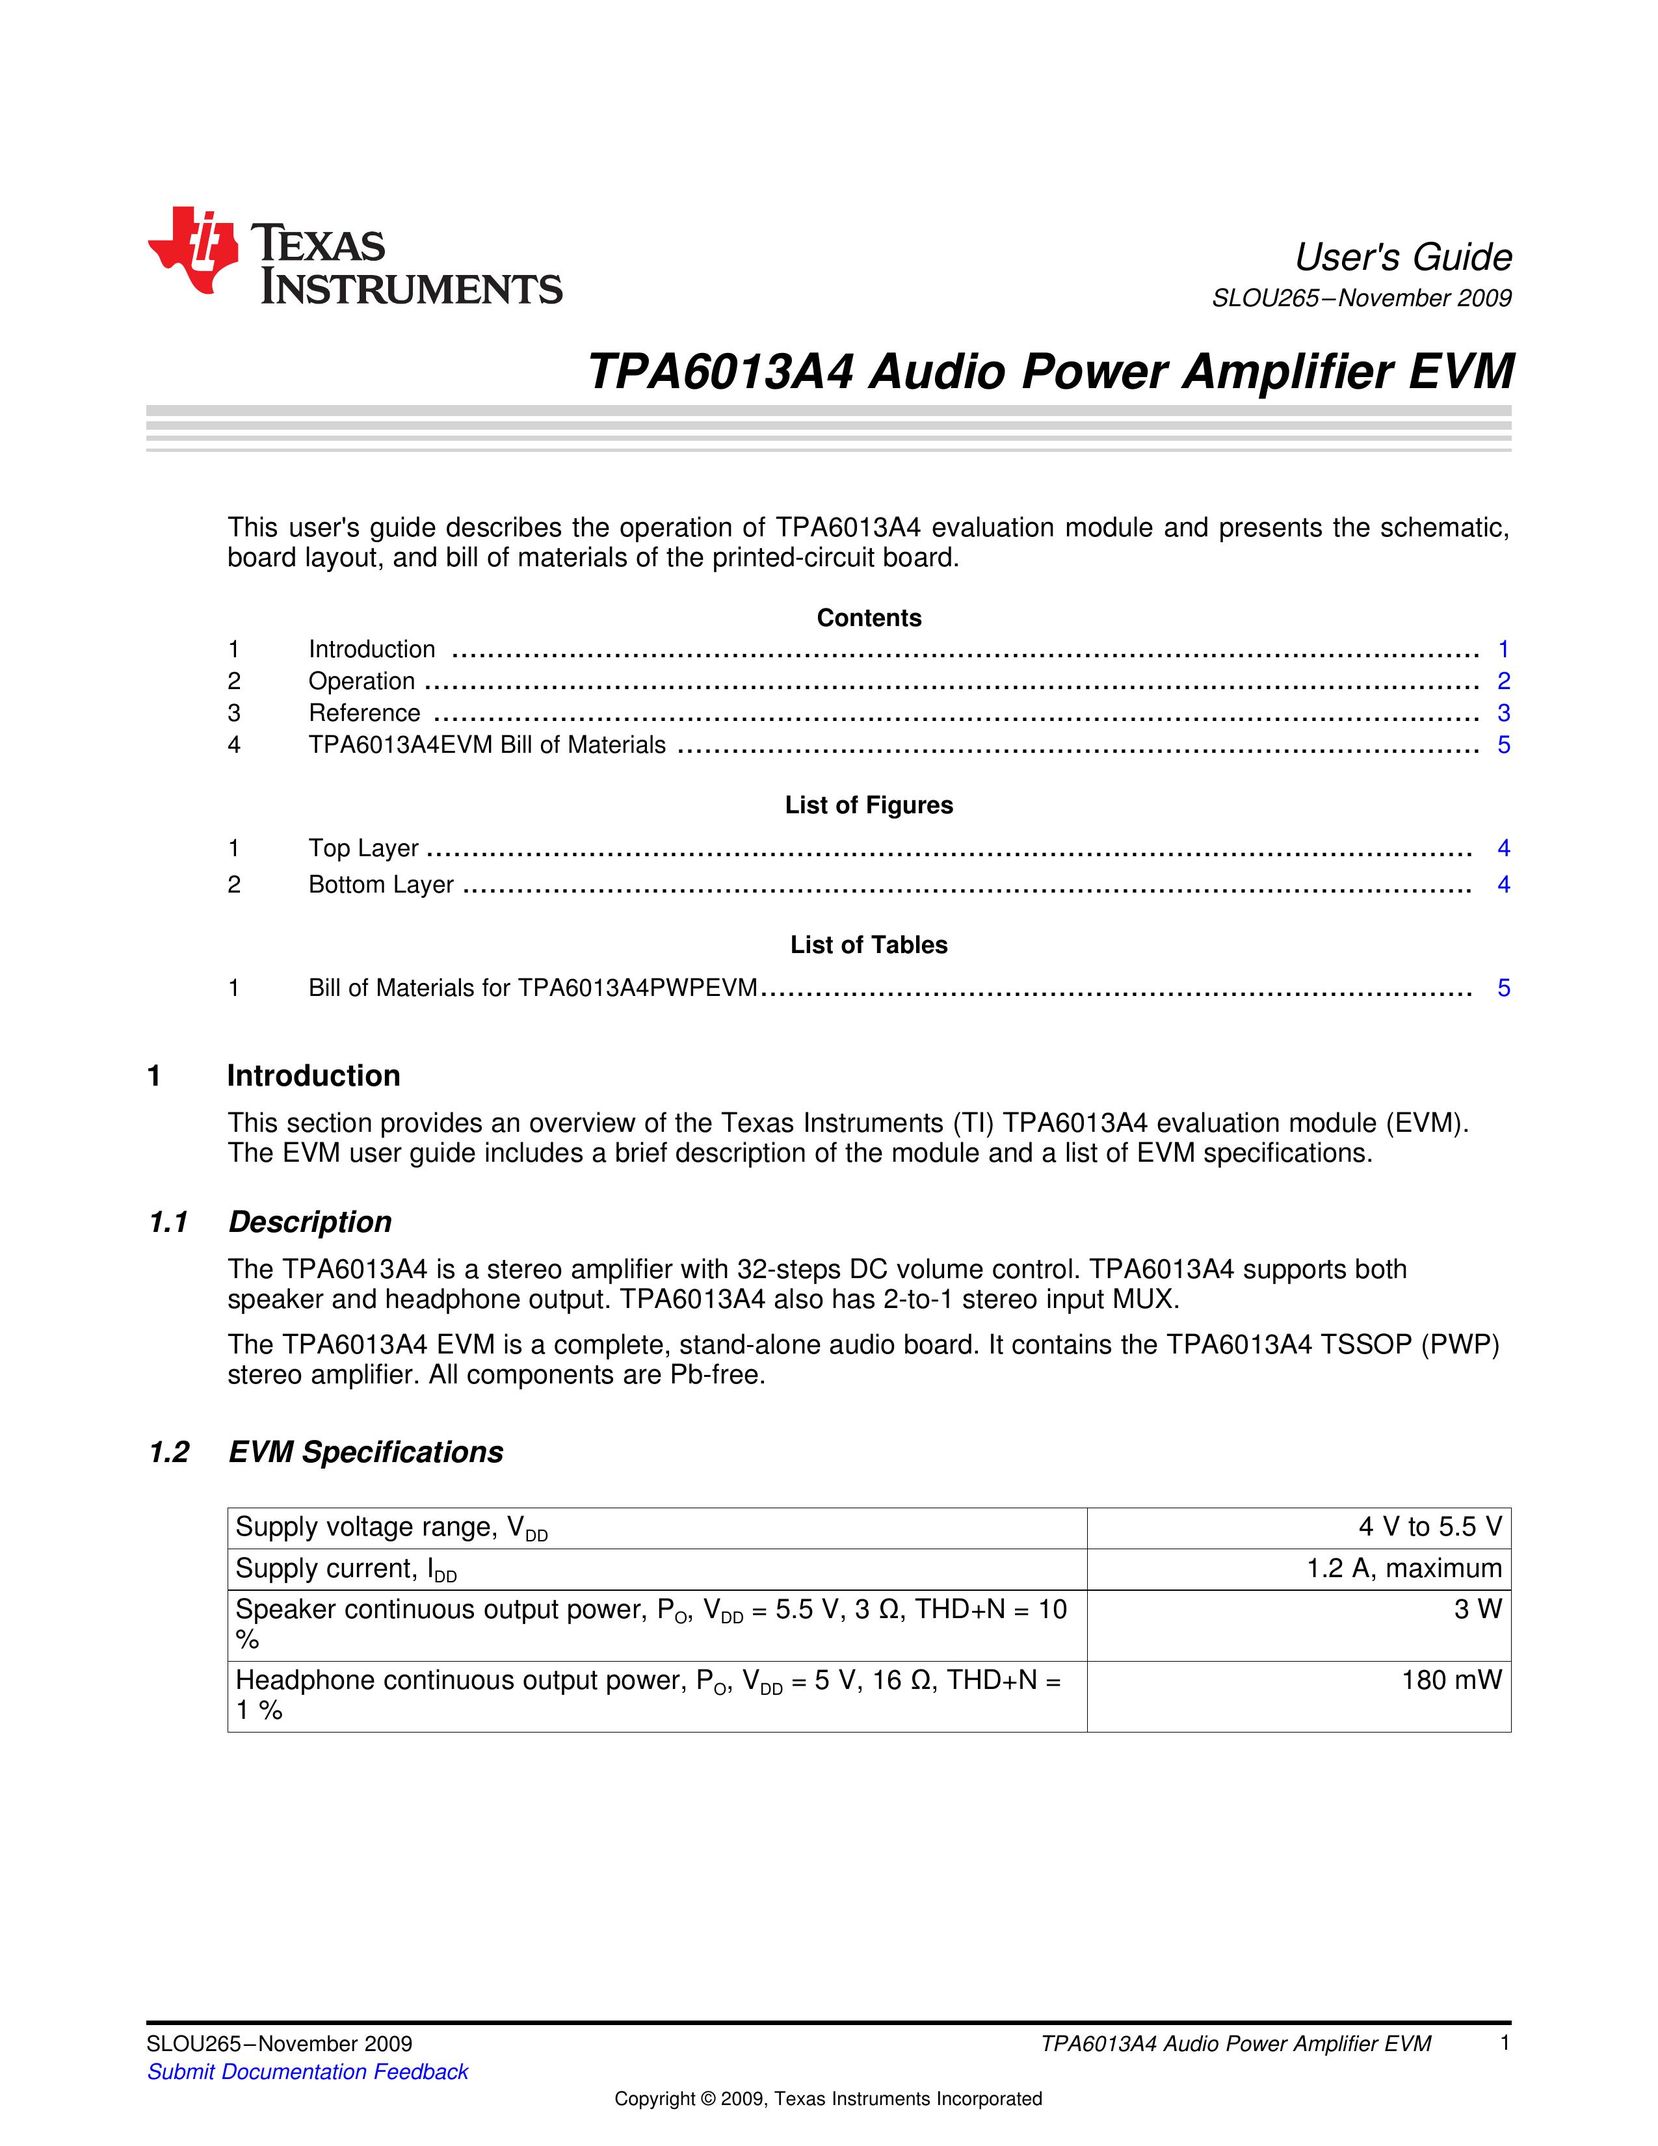 Texas Instruments TPA6013A4 Stereo Amplifier User Manual